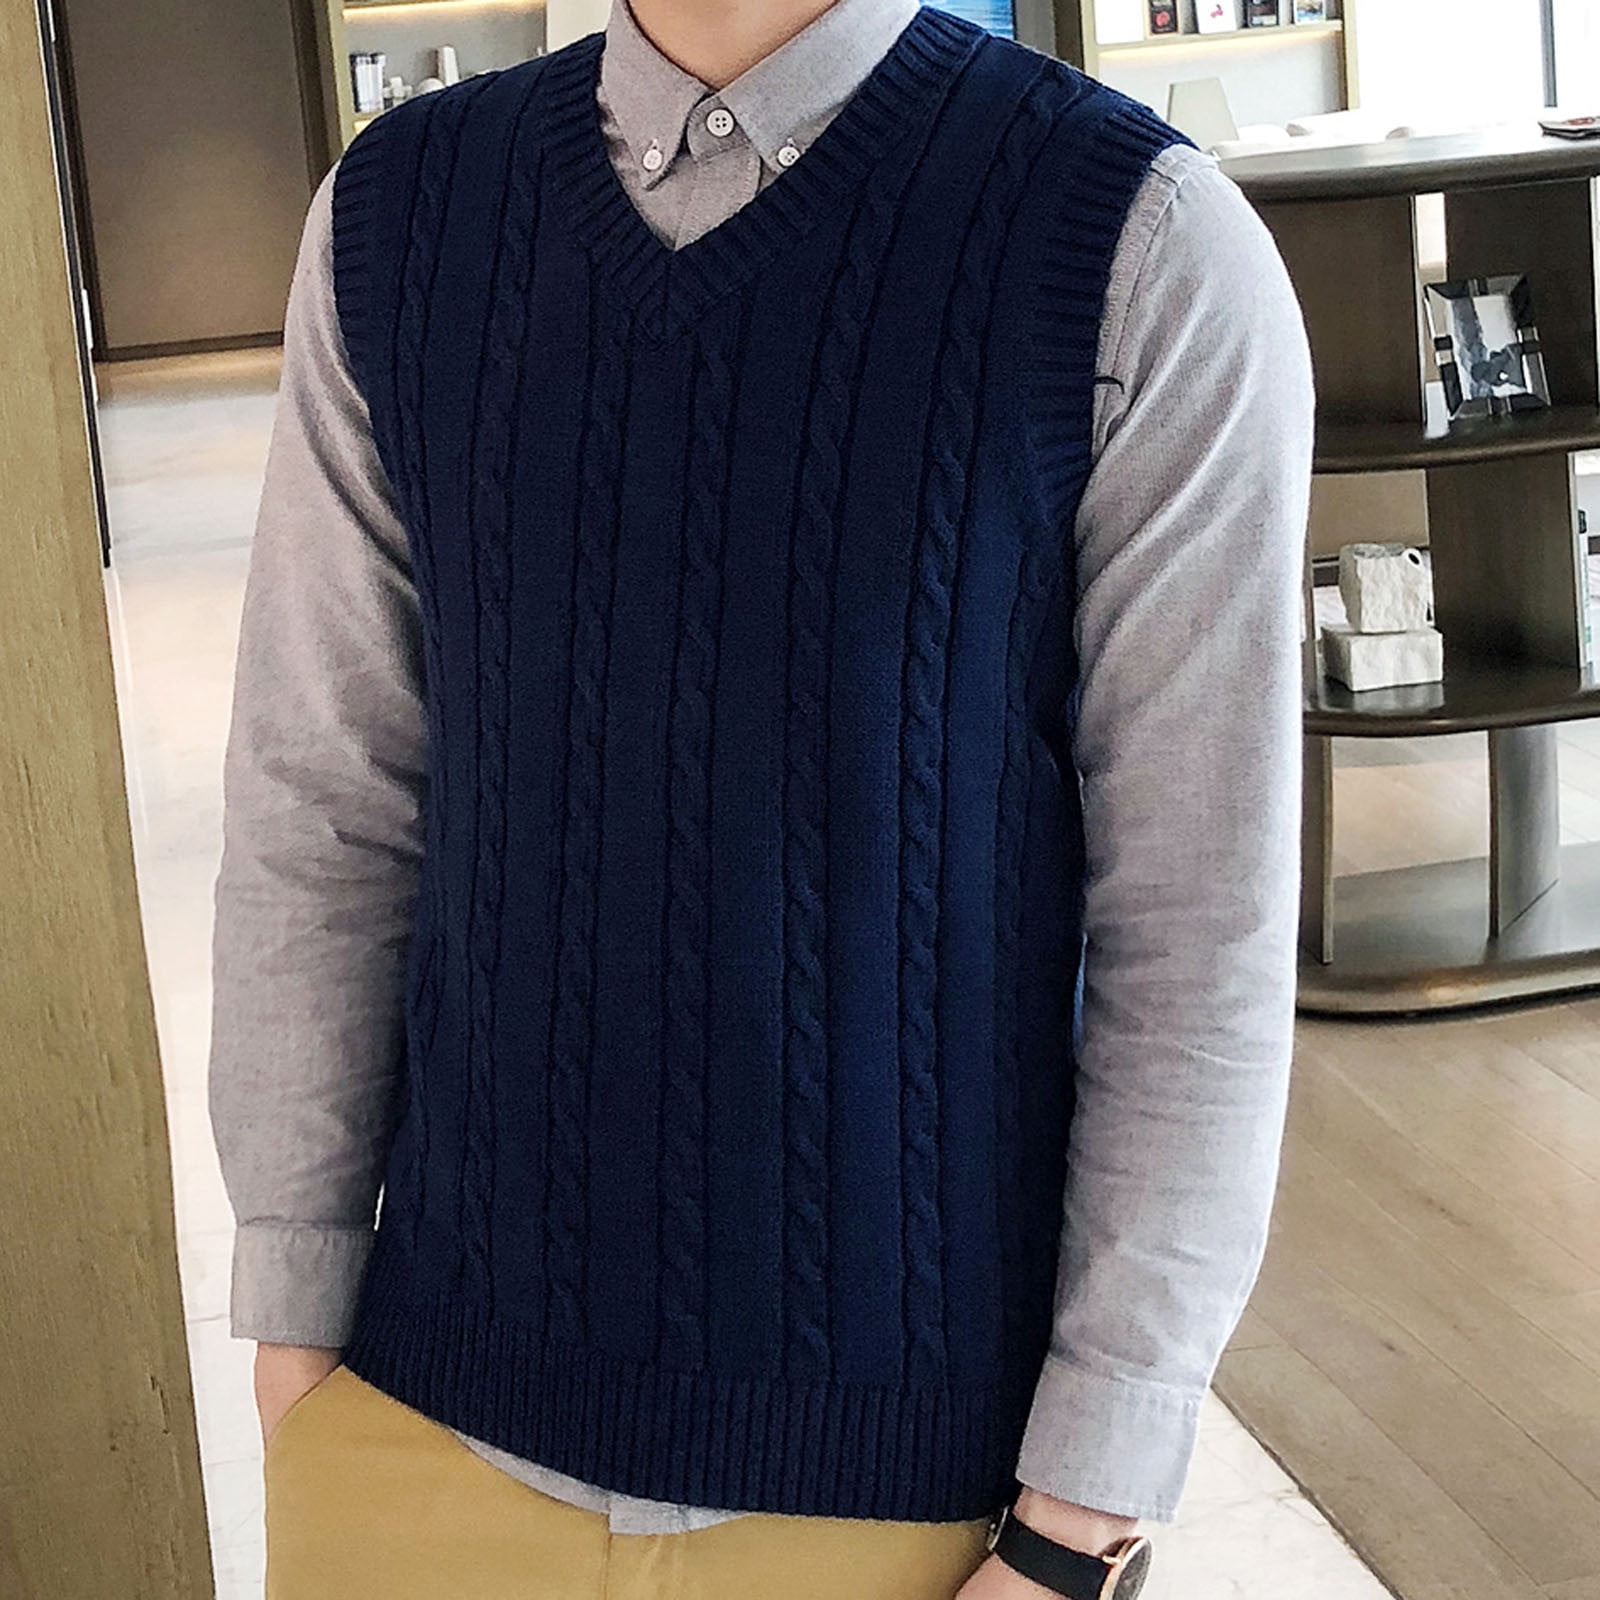 Men's V Neck Sleeveless Sweater Cashmere Wool Blend Relax Fit Pullover Vest Solid Casual Slim Fit Knitted Vest Camel,Small 